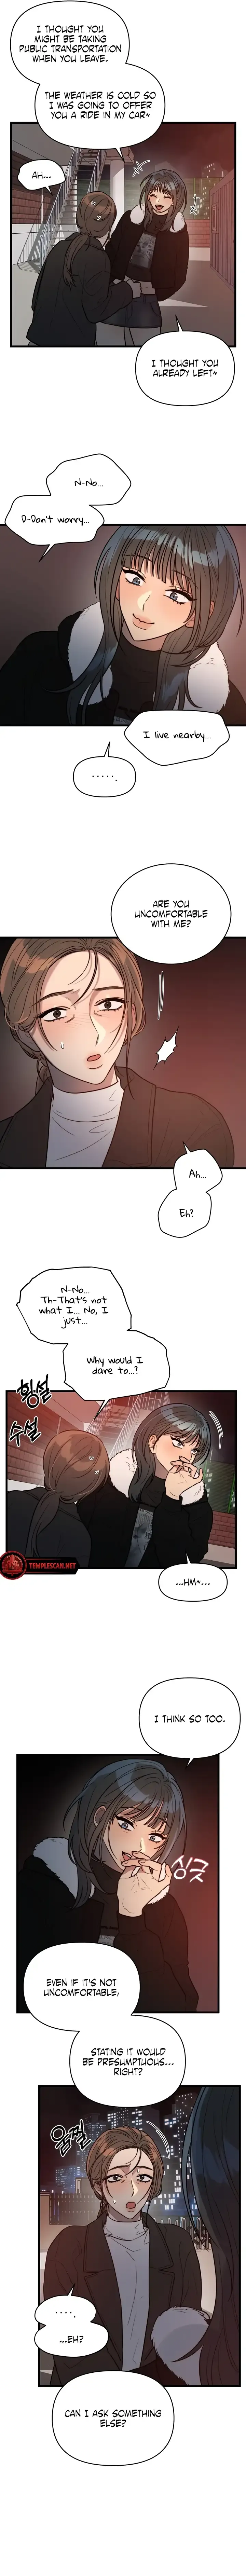 Immoral Parody Chapter 1 - Page 8